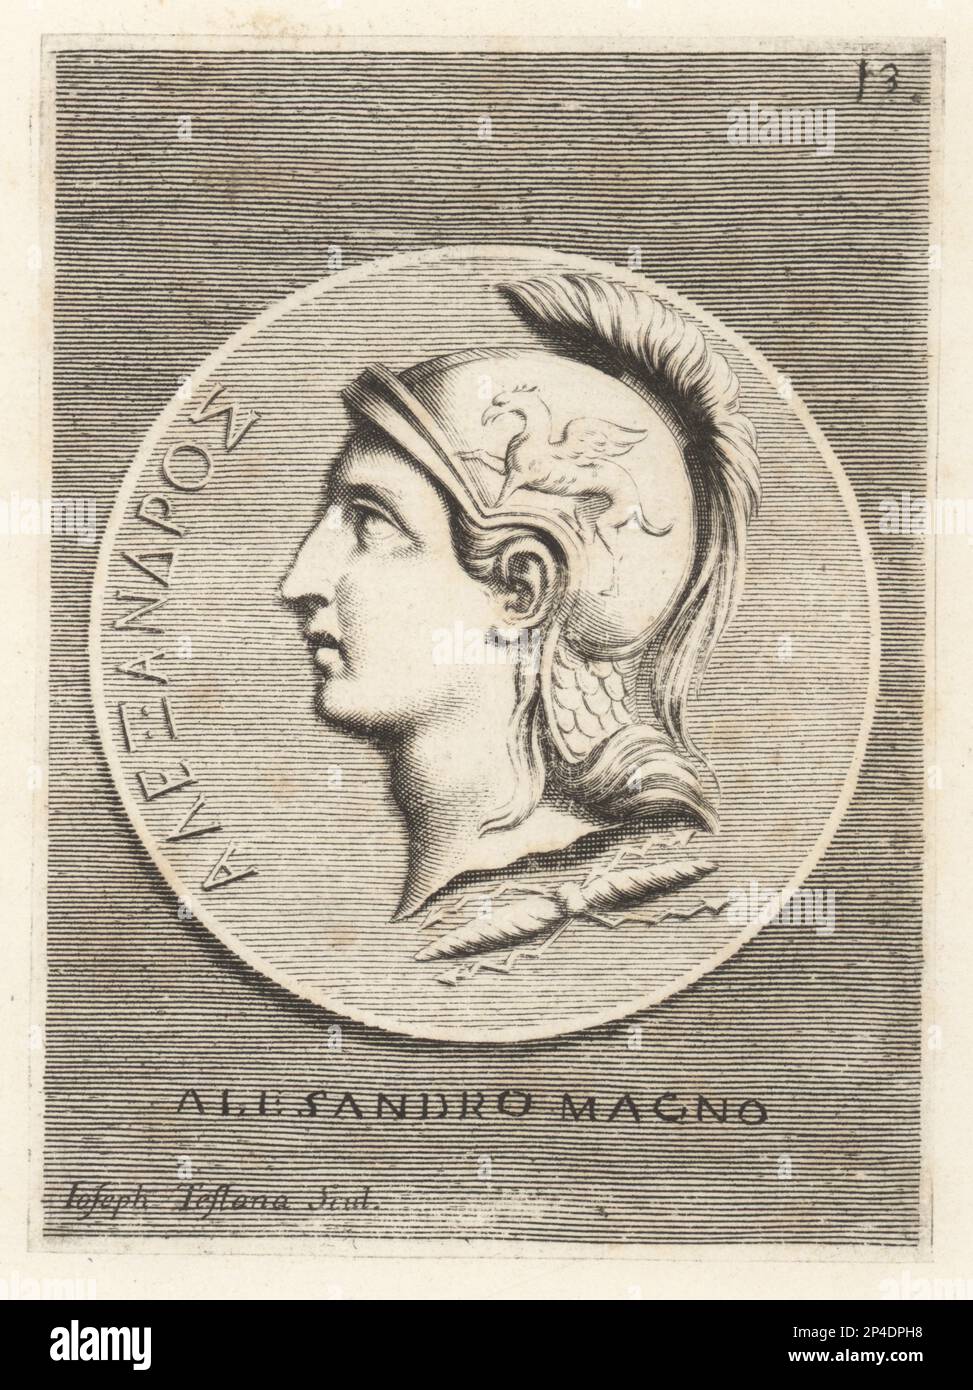 Profile portrait of Alexander the Great, Alexander III of Macedon, 356 – 323 BC, king of the ancient Greek kingdom of Macedon. Wearing a crested Corinthian helmet decorated with a winged horse Bucephalus, a thunderbolt at his neck. From a copper coin. Alessandro Magno. Copperplate engraving by Joseph Testana after Giovanni Angelo Canini from Iconografia, cioe disegni d'imagini de famosissimi monarchi, regi, filososi, poeti ed oratori dell' Antichita, Drawings of images of famous monarchs, kings, philosophers, poets and orators of Antiquity, Ignatio de’Lazari, Rome, 1699. Stock Photo